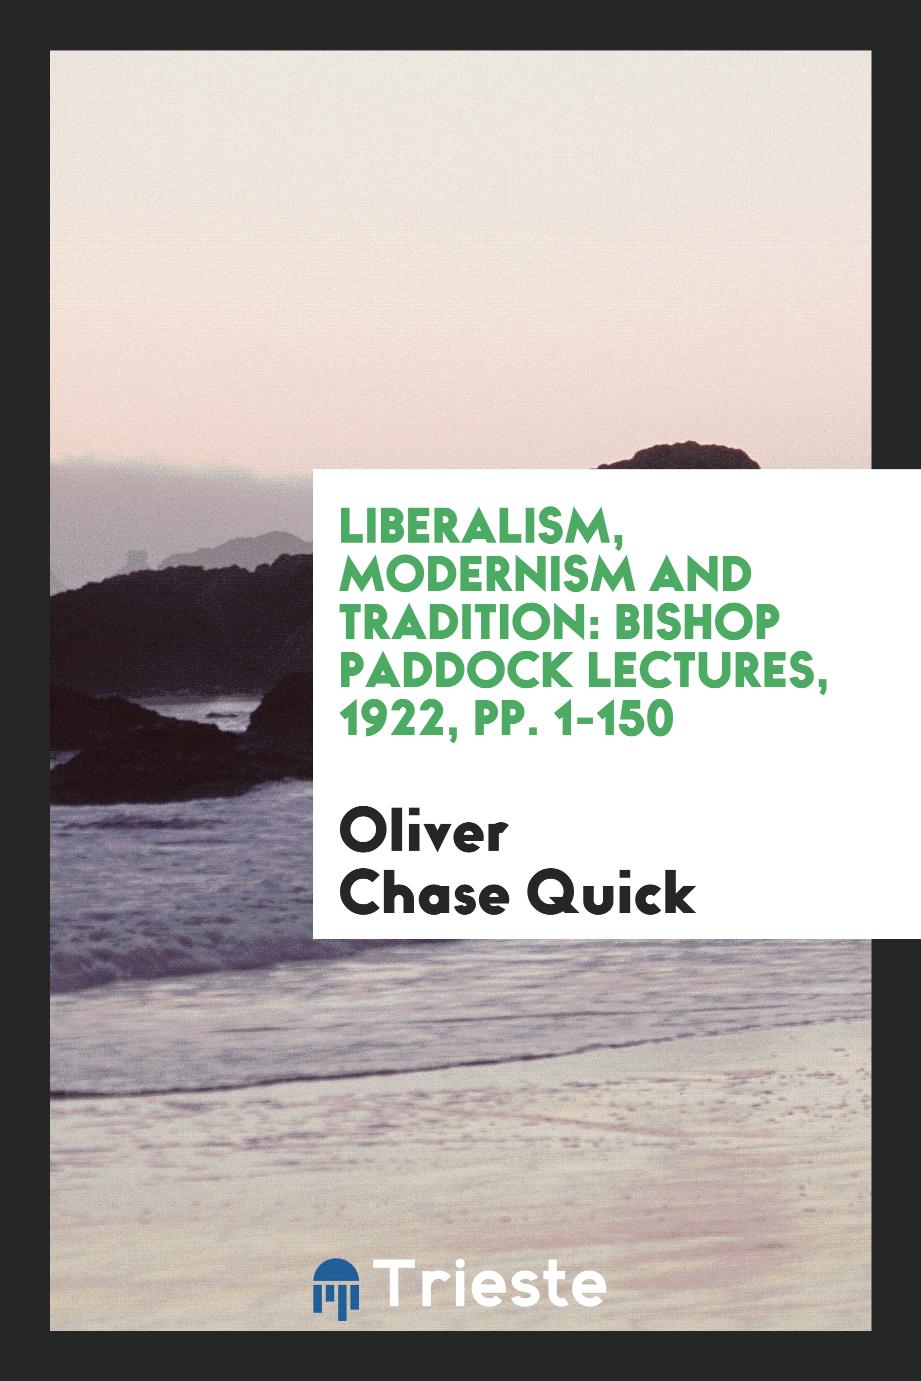 Liberalism, Modernism and Tradition: Bishop Paddock Lectures, 1922, pp. 1-150